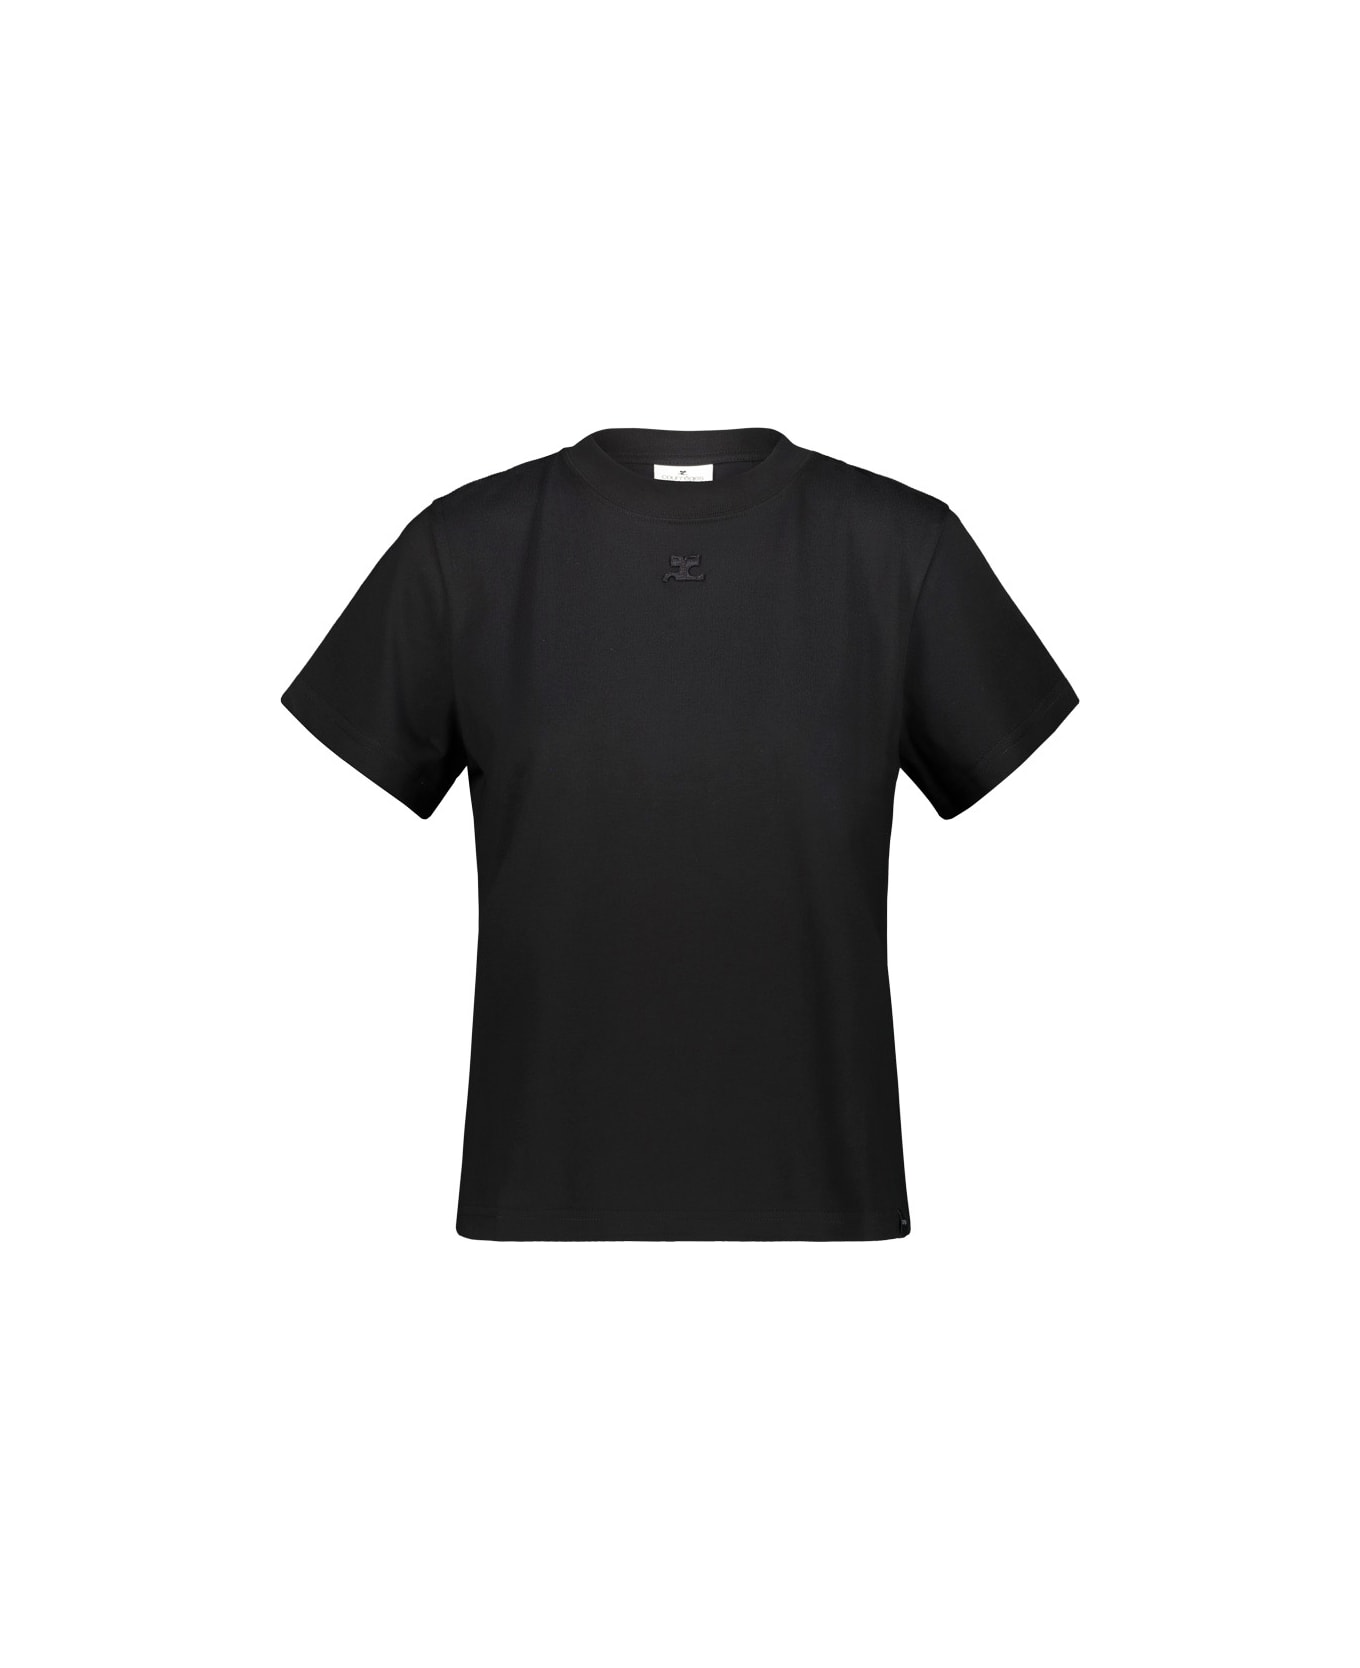 Courrèges Straight Dry Jersey T-shirt - Black Tシャツ